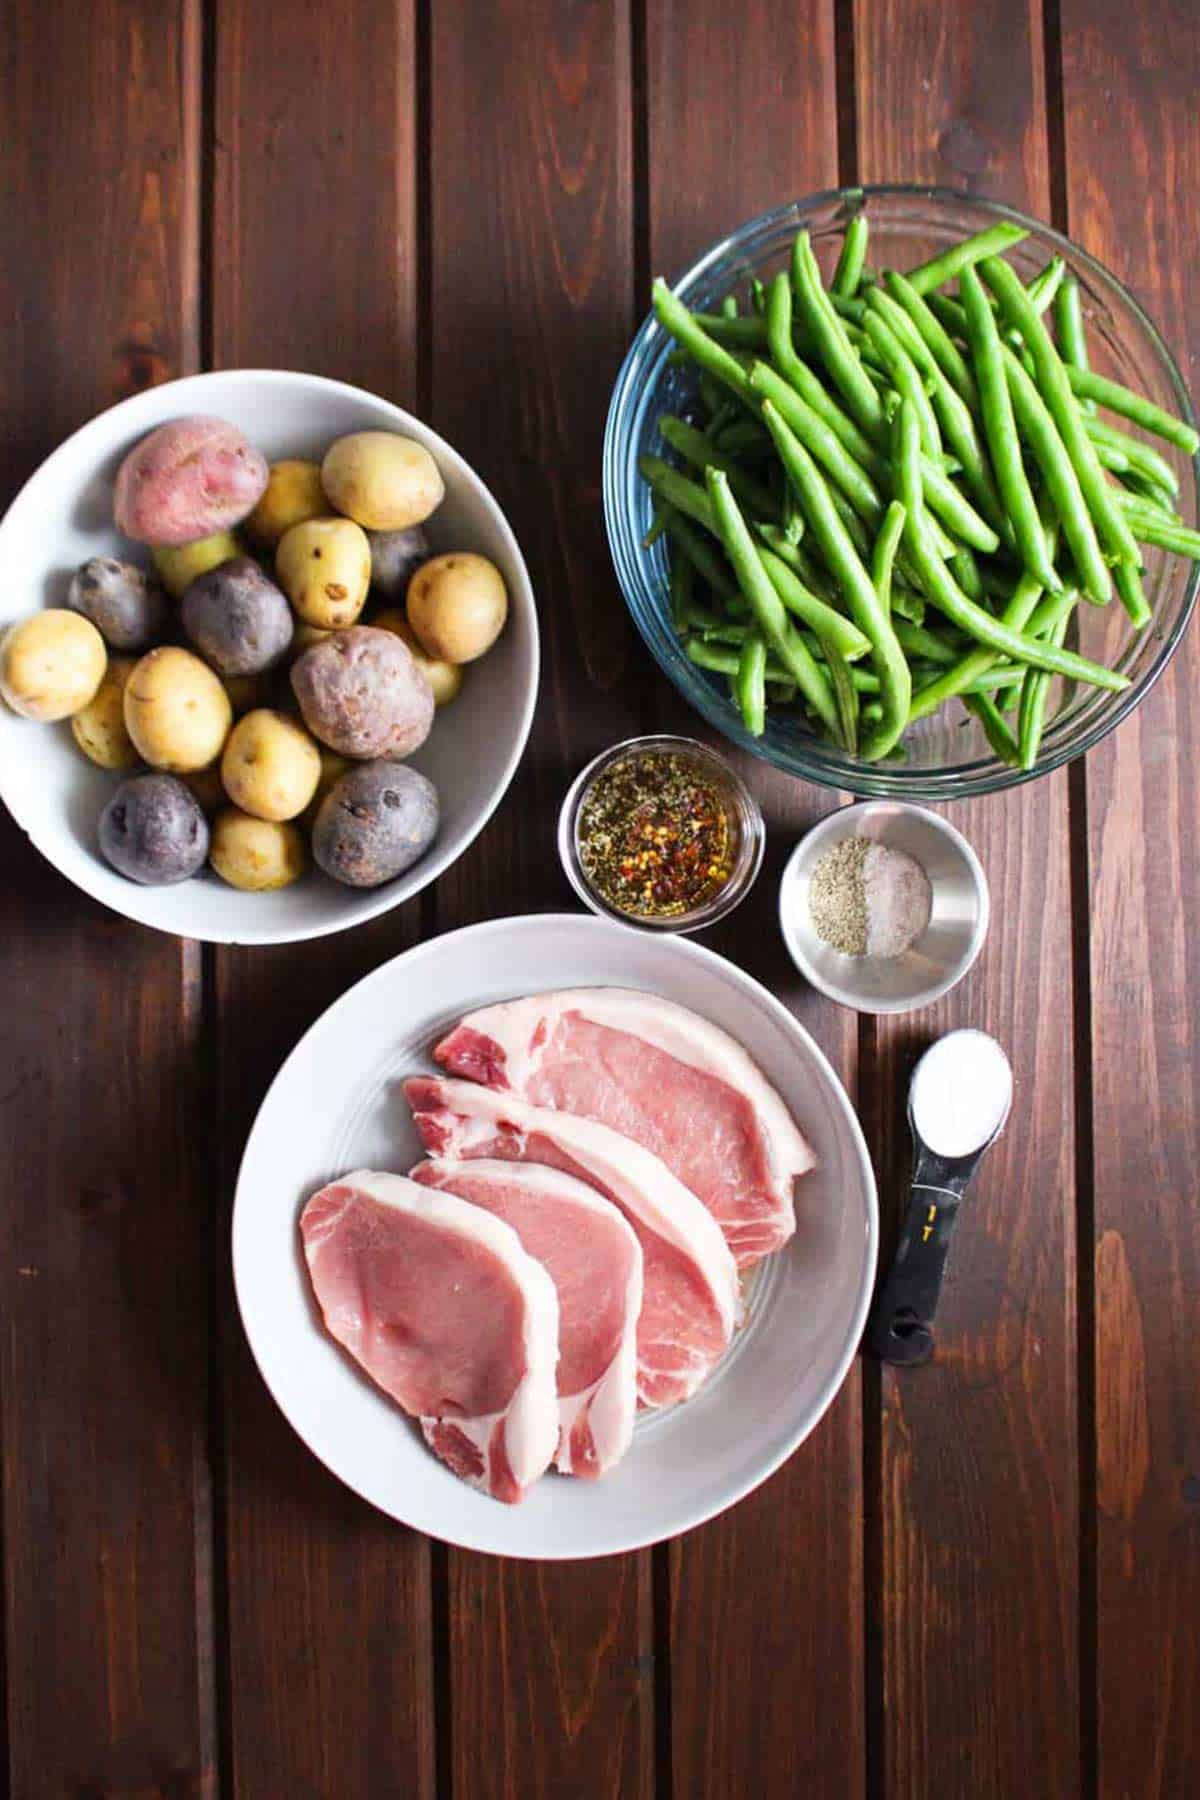 Ingredients for slow cooker pork chops on the table.